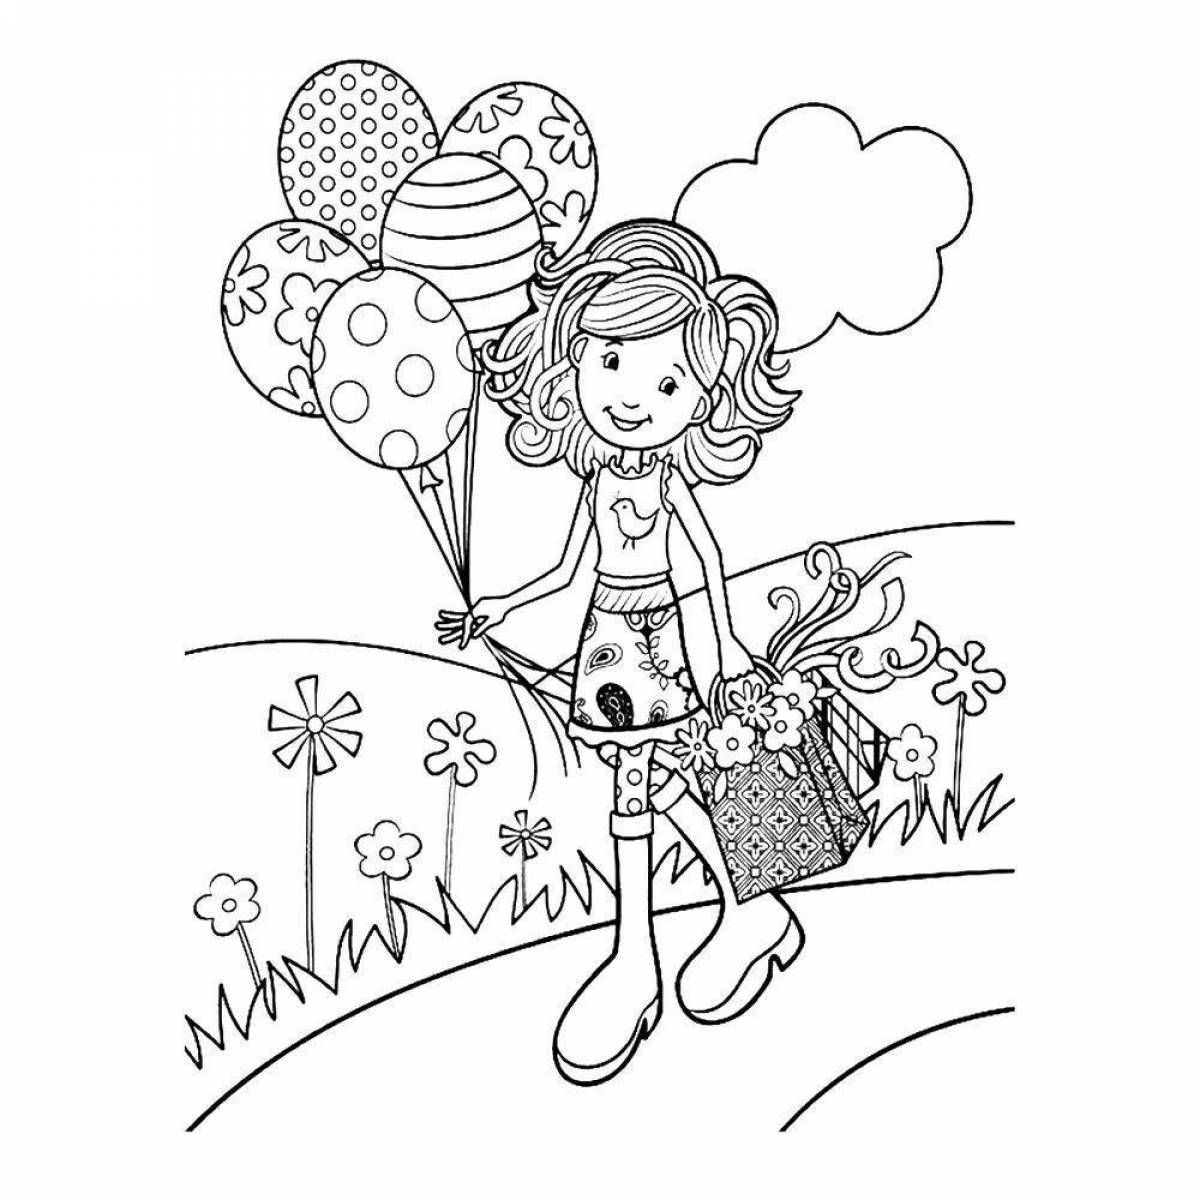 Coloring page excited anastasis